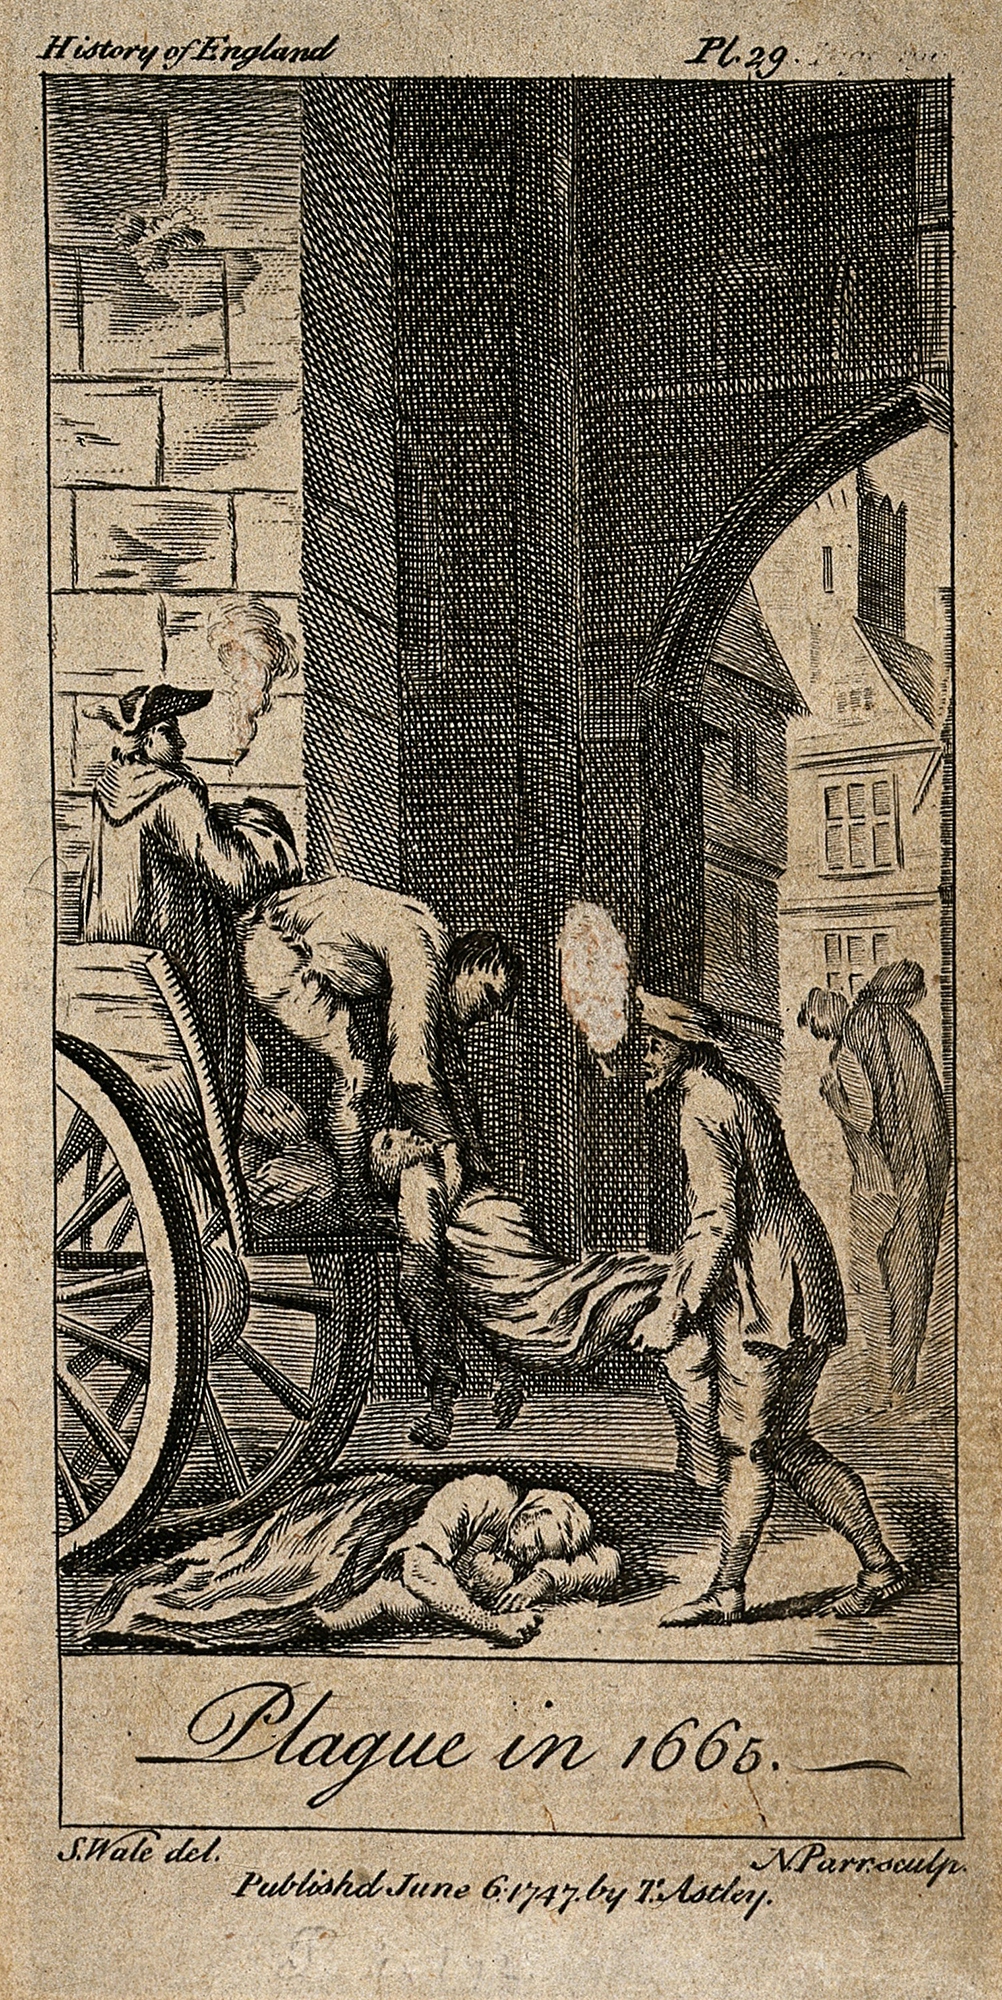 Victims of the plague in 1665 being lifted on to death carts